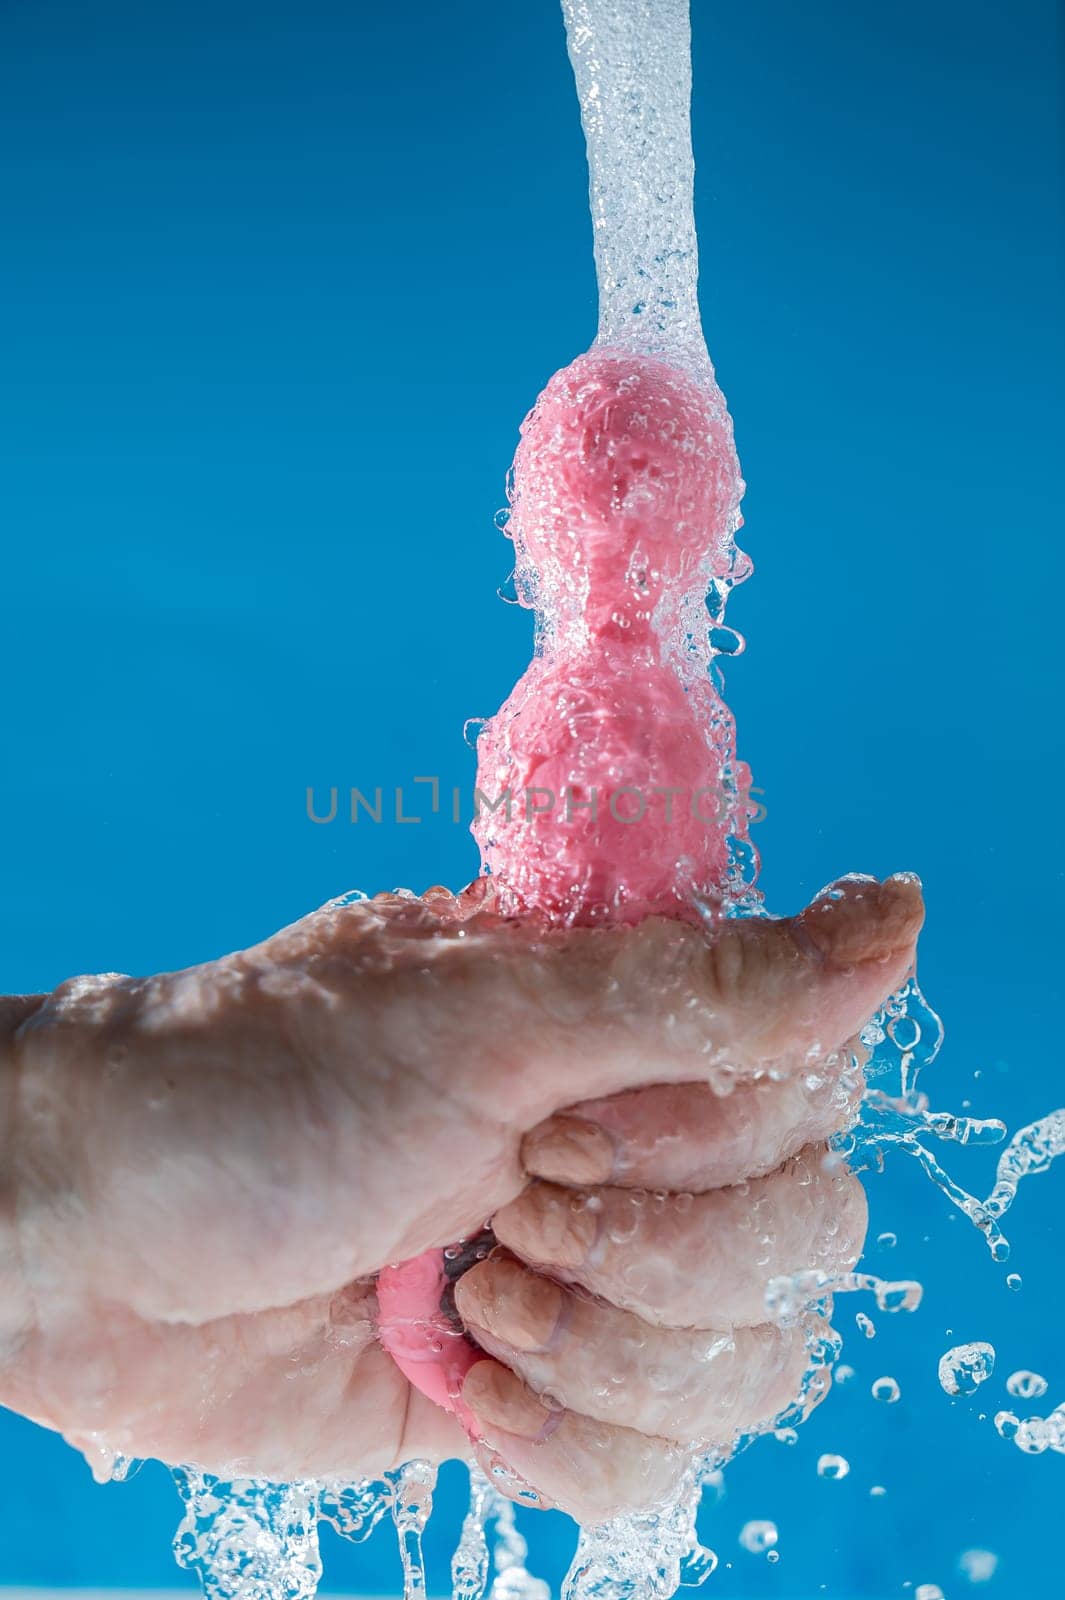 Woman holding pink anal beads under running water on blue background. Sex toy hygiene concept. by mrwed54